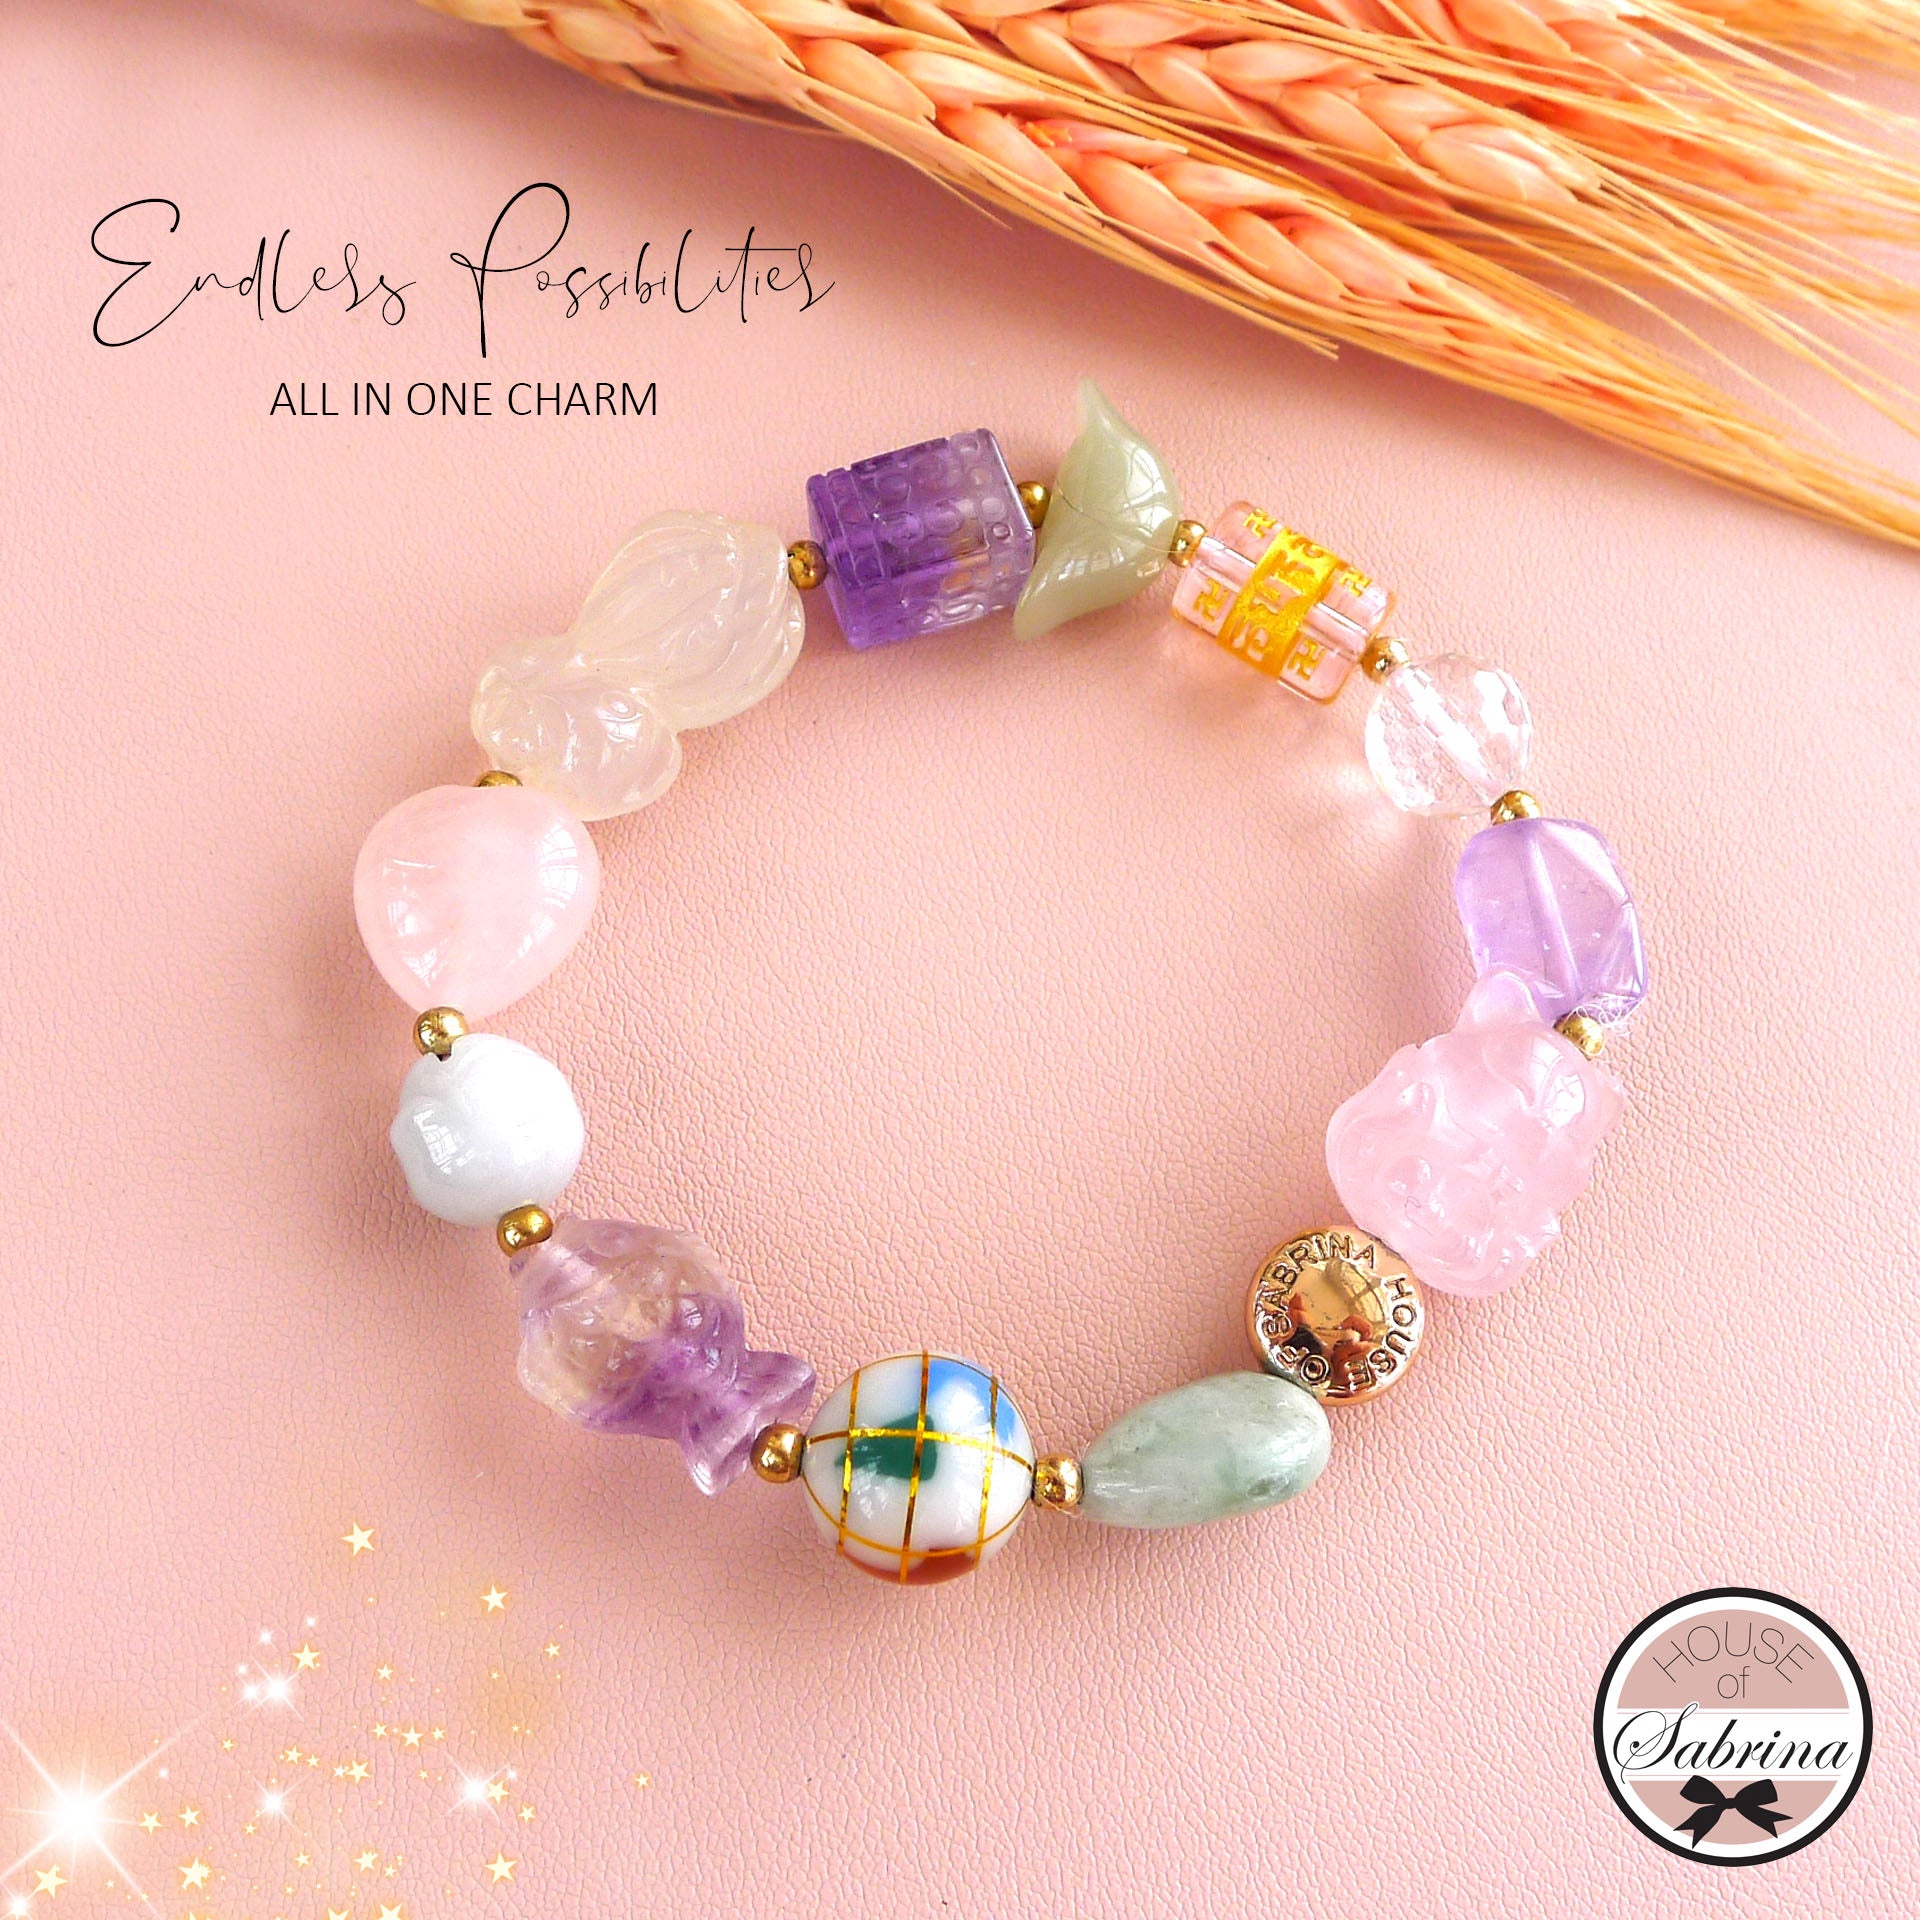 ENDLESS POSSIBILITIES ALL IN ONE GEMSTONE LUCKY CHARM